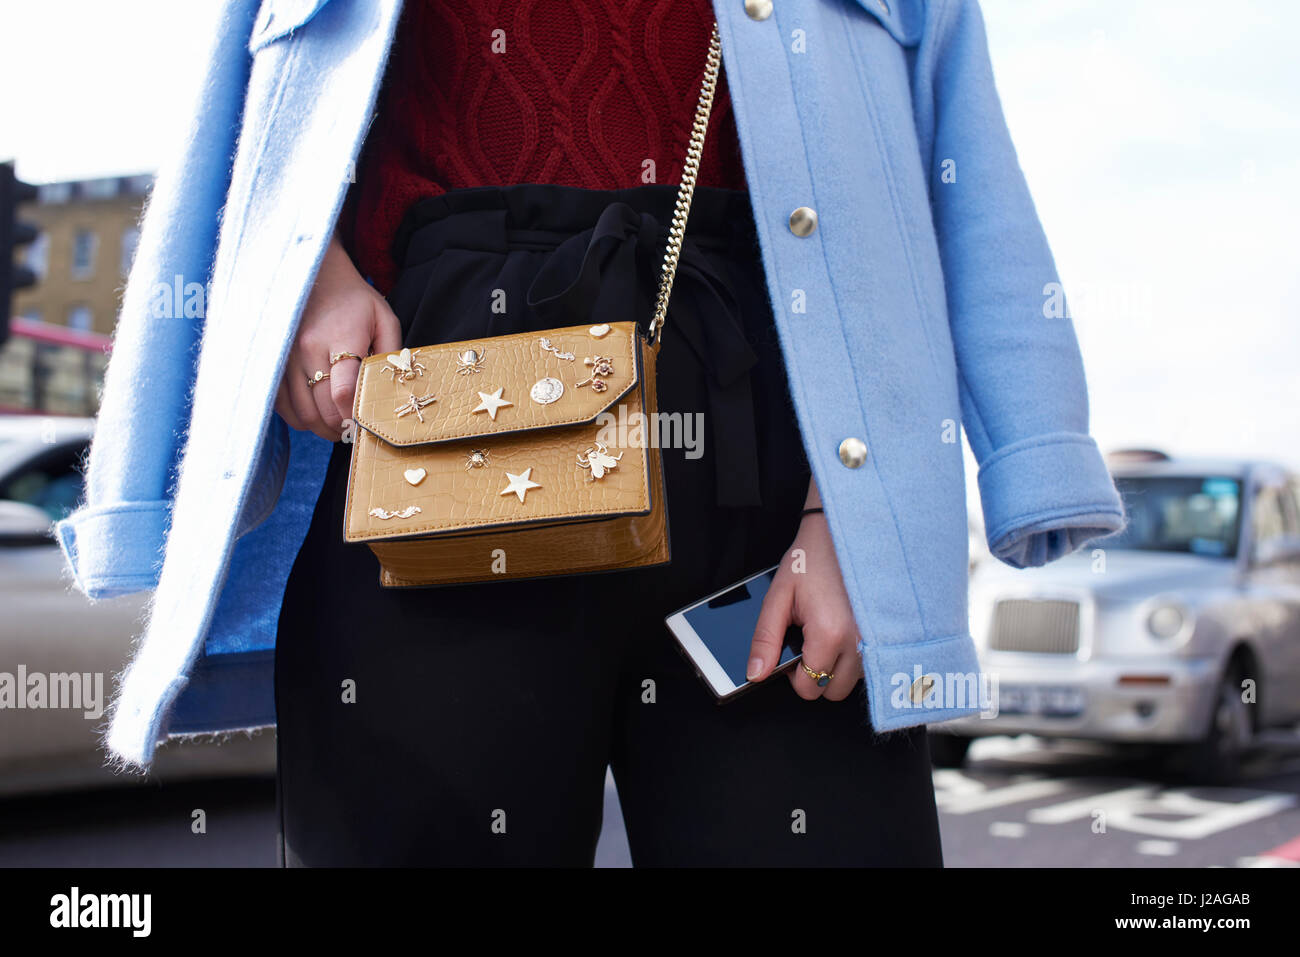 LONDON - FEBRUARY, 2017: Mid section of woman wearing Zara cross body handbag with metal details and blue coat on shoulders in street during London Fashion Week Stock Photo